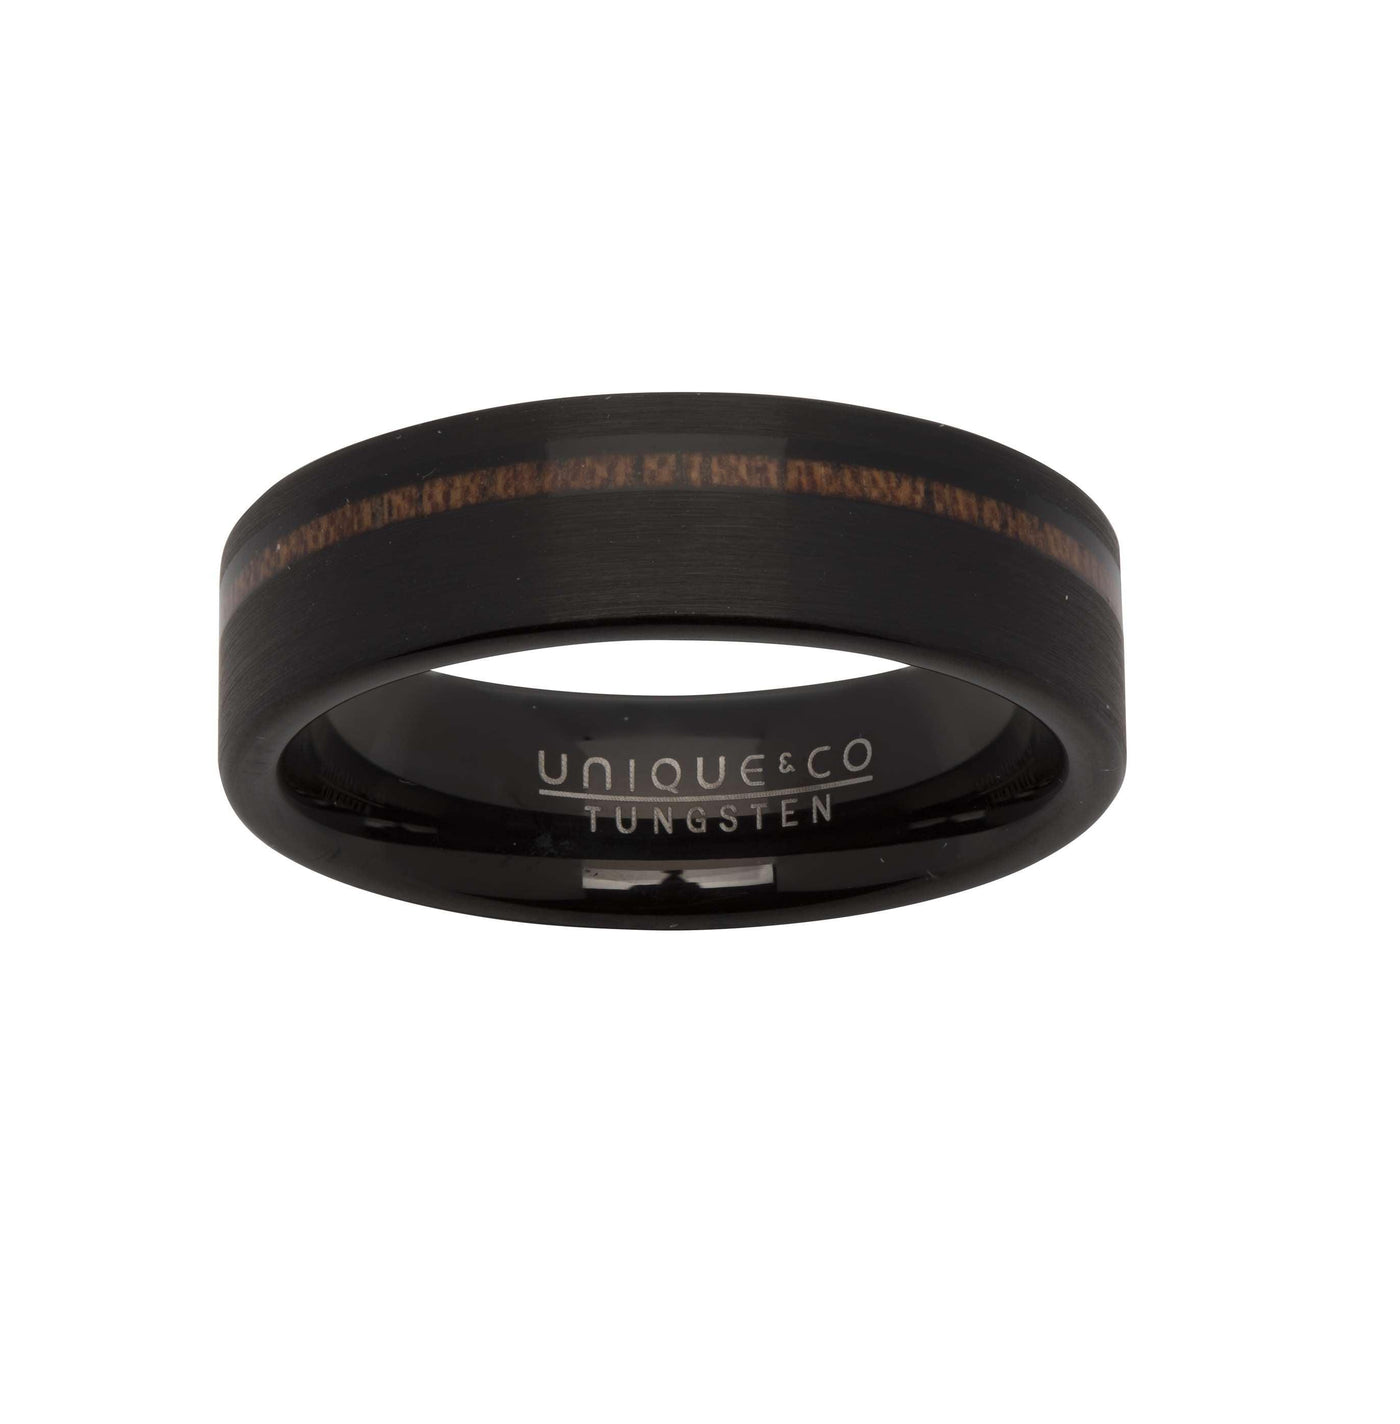 Unique & Co Tungsten Ring with a Wood Inlay and Matt Black Finish - Rococo Jewellery